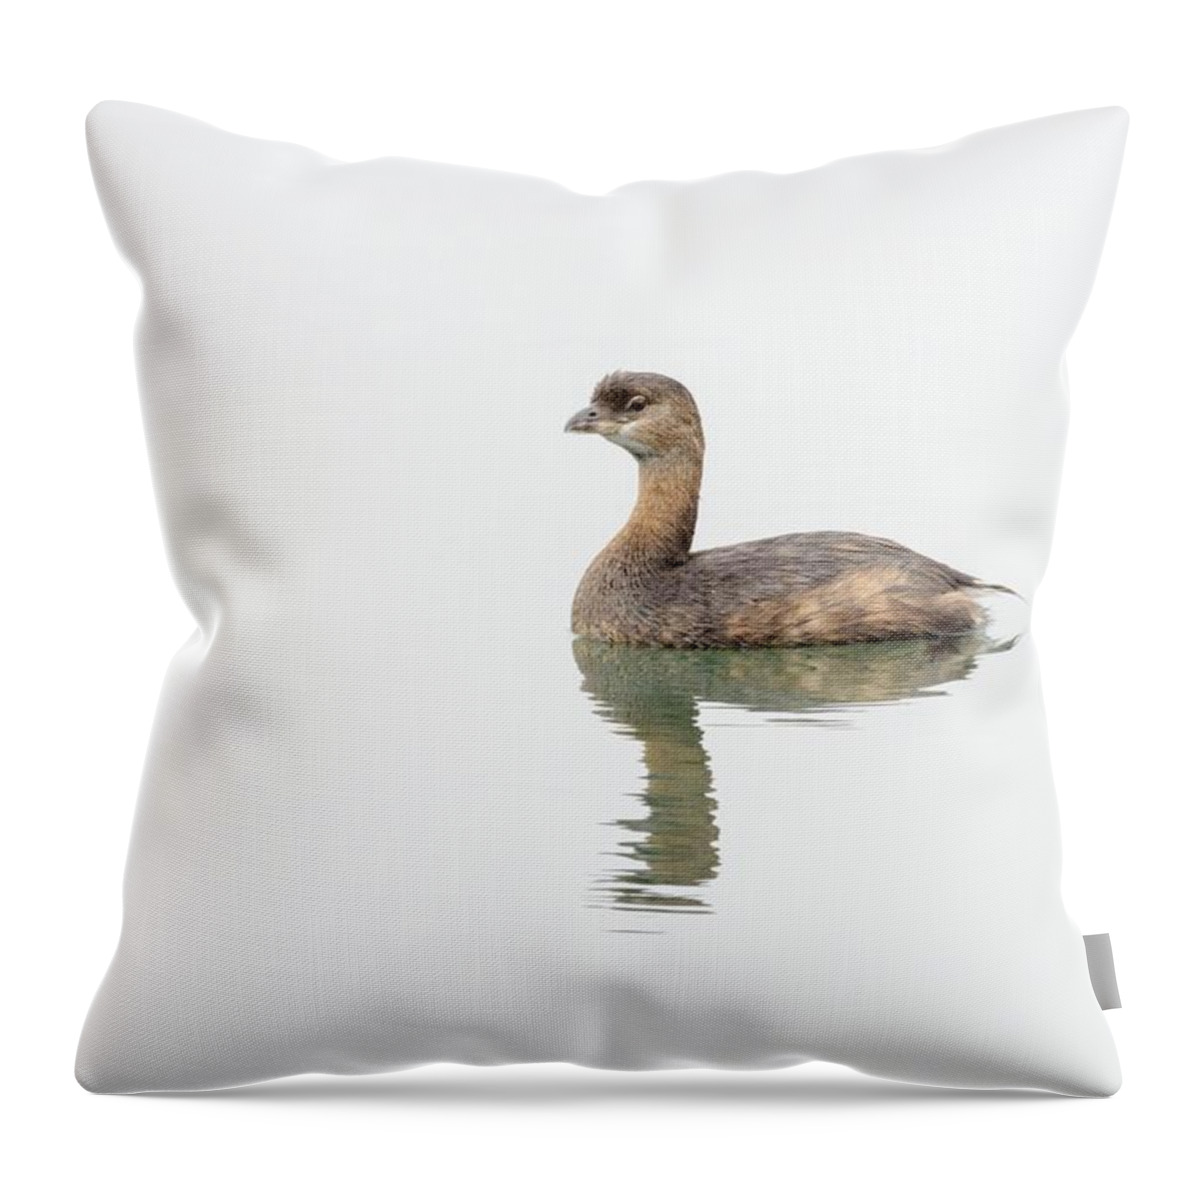  Throw Pillow featuring the photograph I am by Sherry Clark